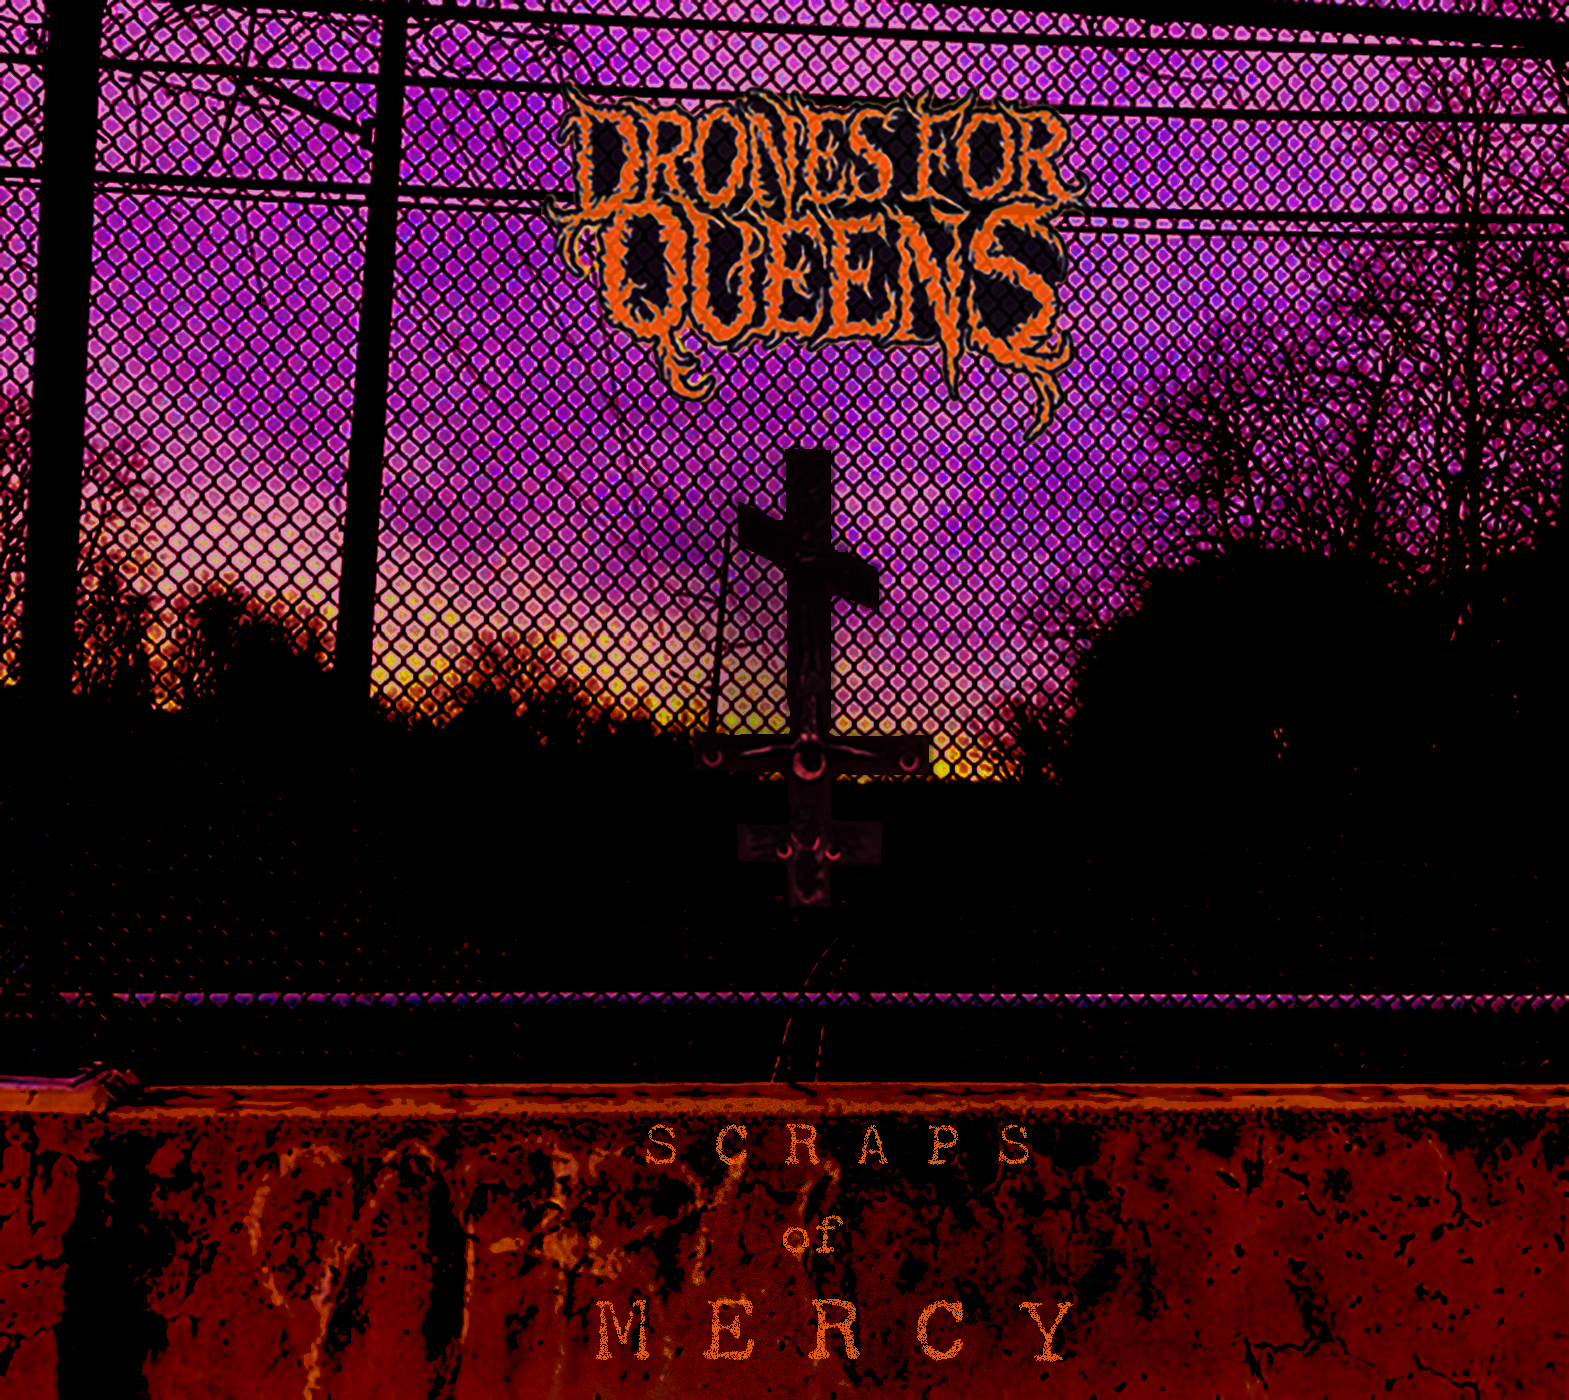 Drones for Queens band album cover